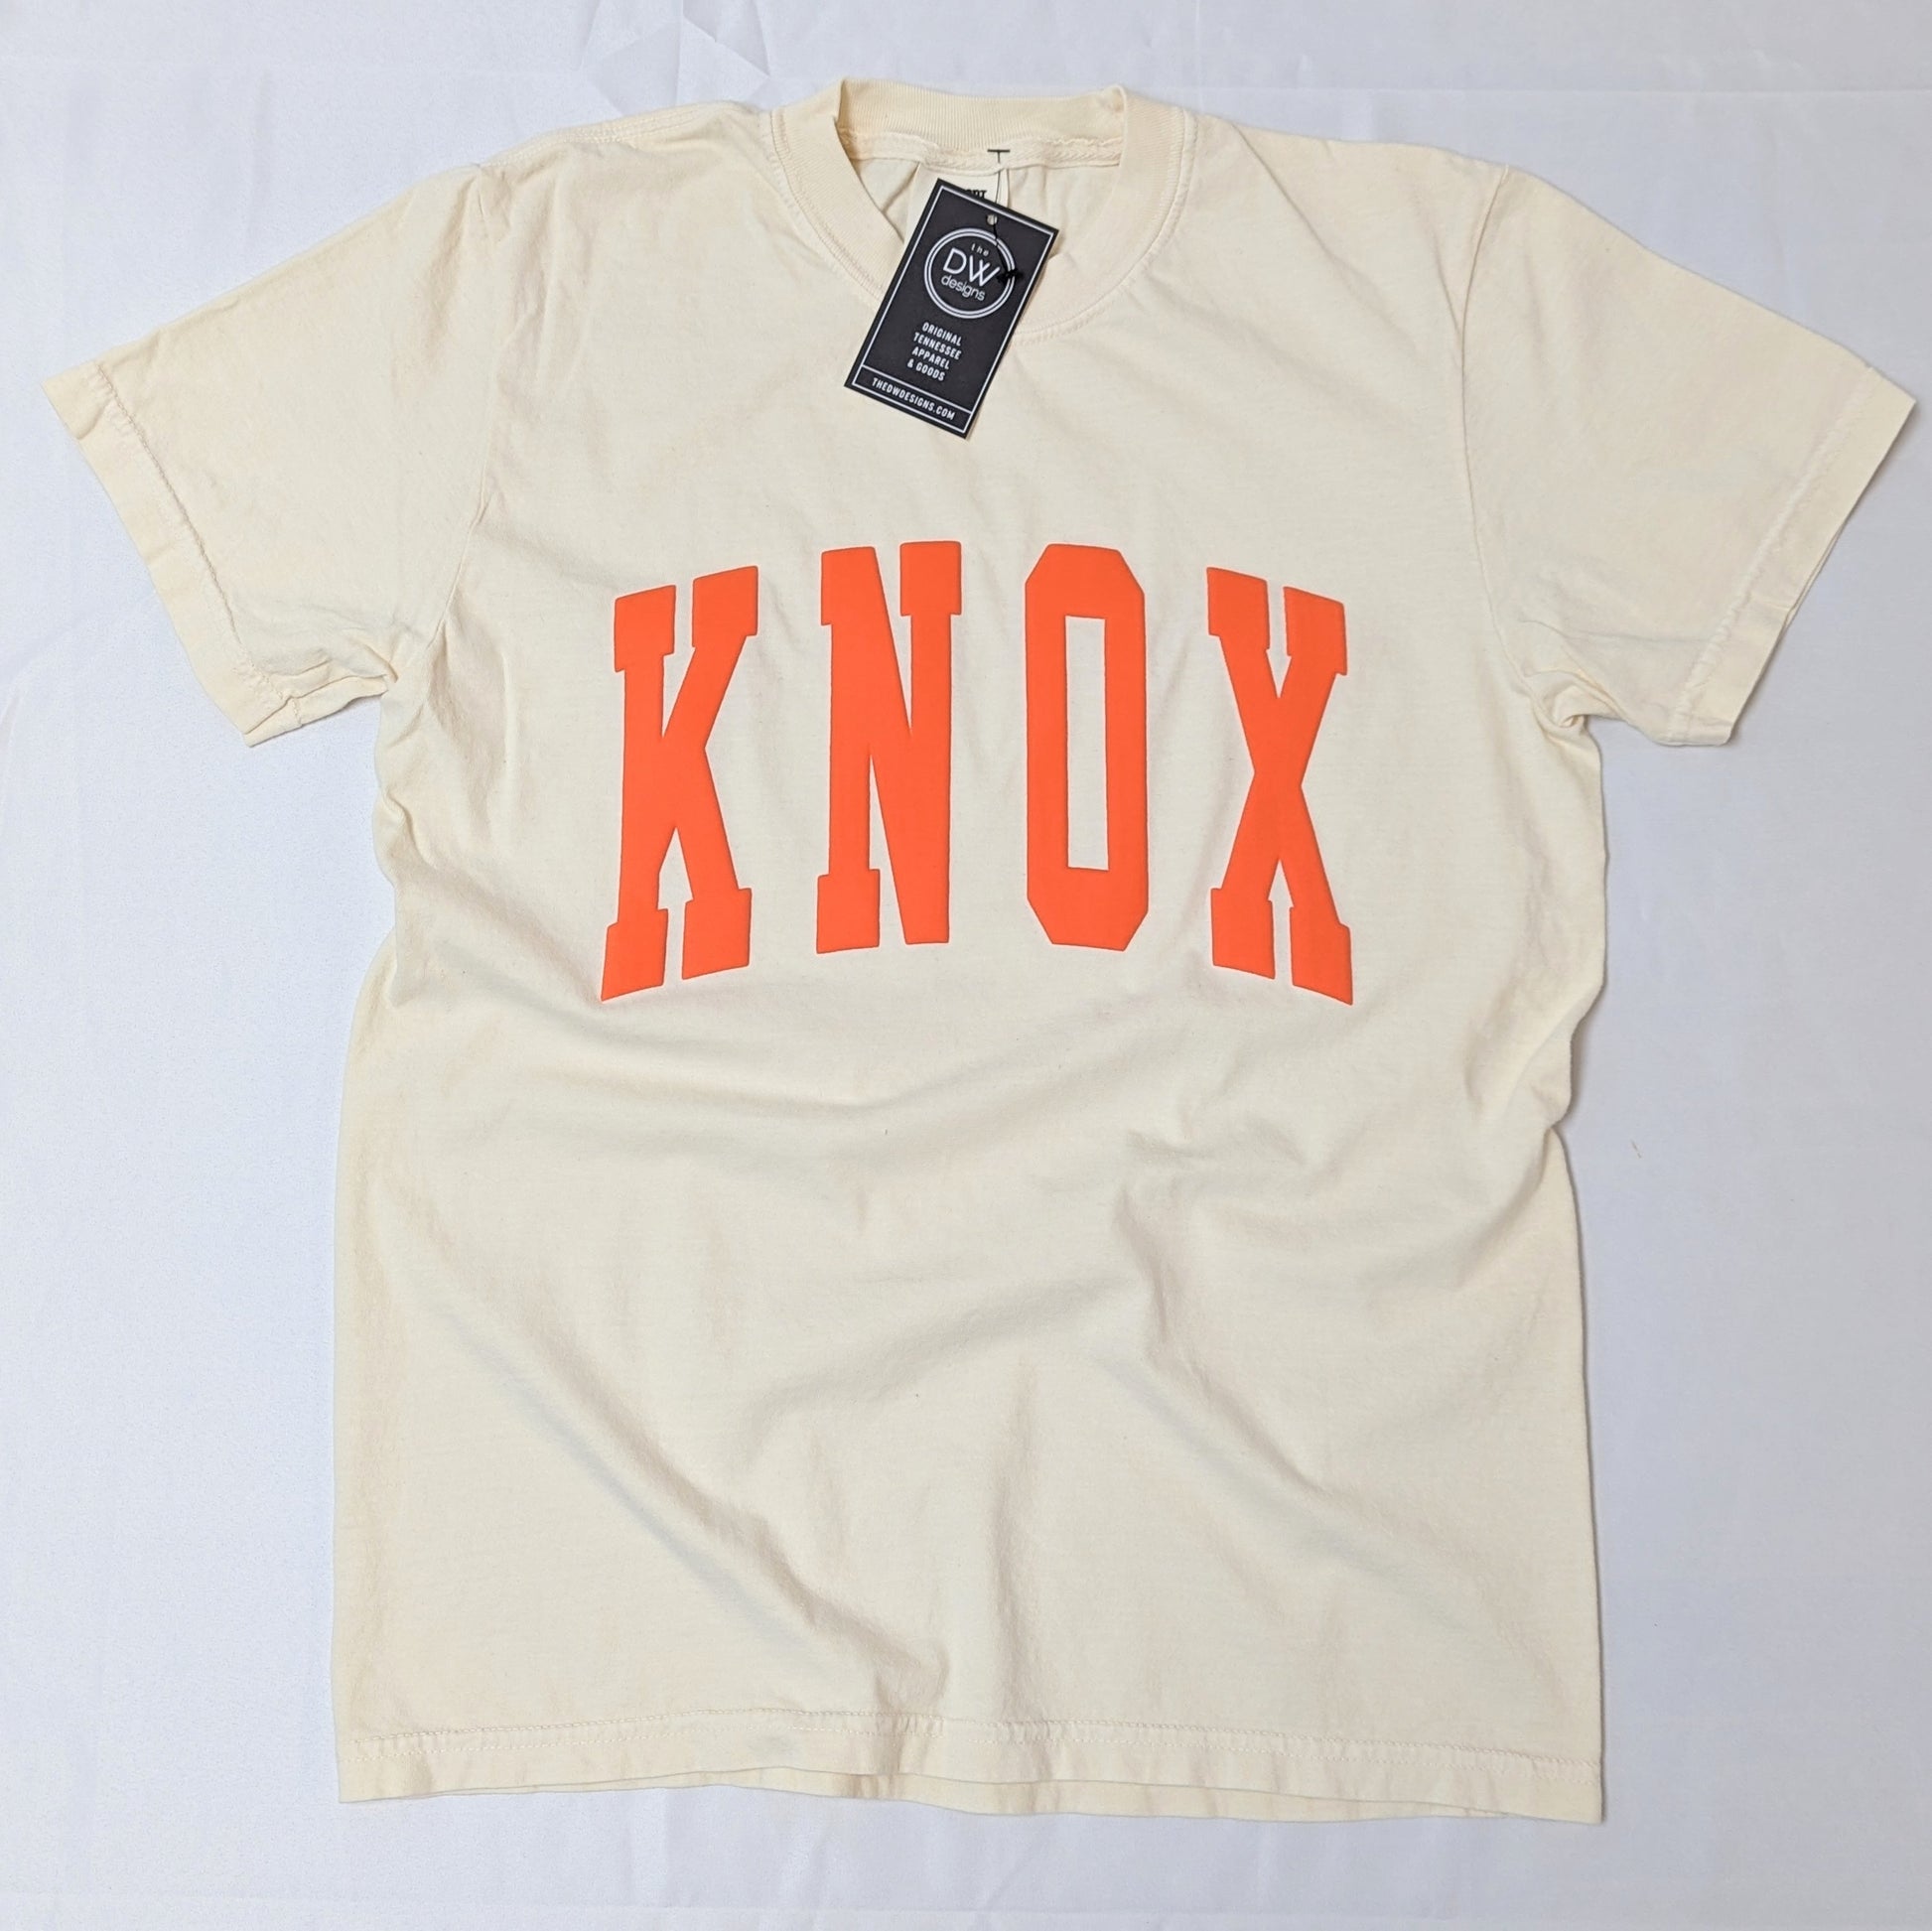 The Knox Puff Tee features the word Knox in large capital letters. Sold by The DW Designs, Knoxville, TN.